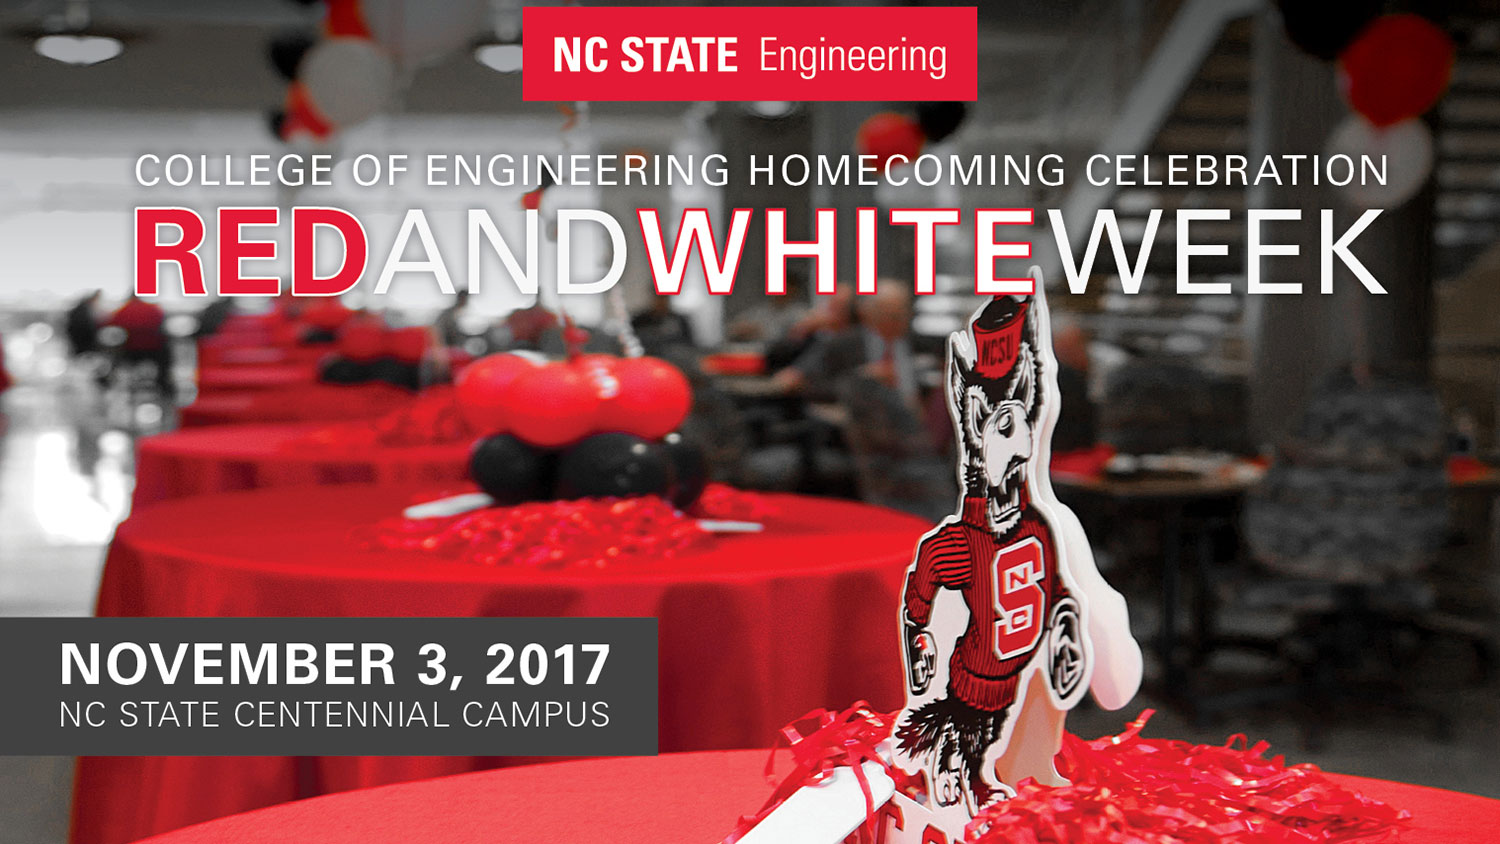 Red and White Week, November 3, 2017, NC State Centennial Campus